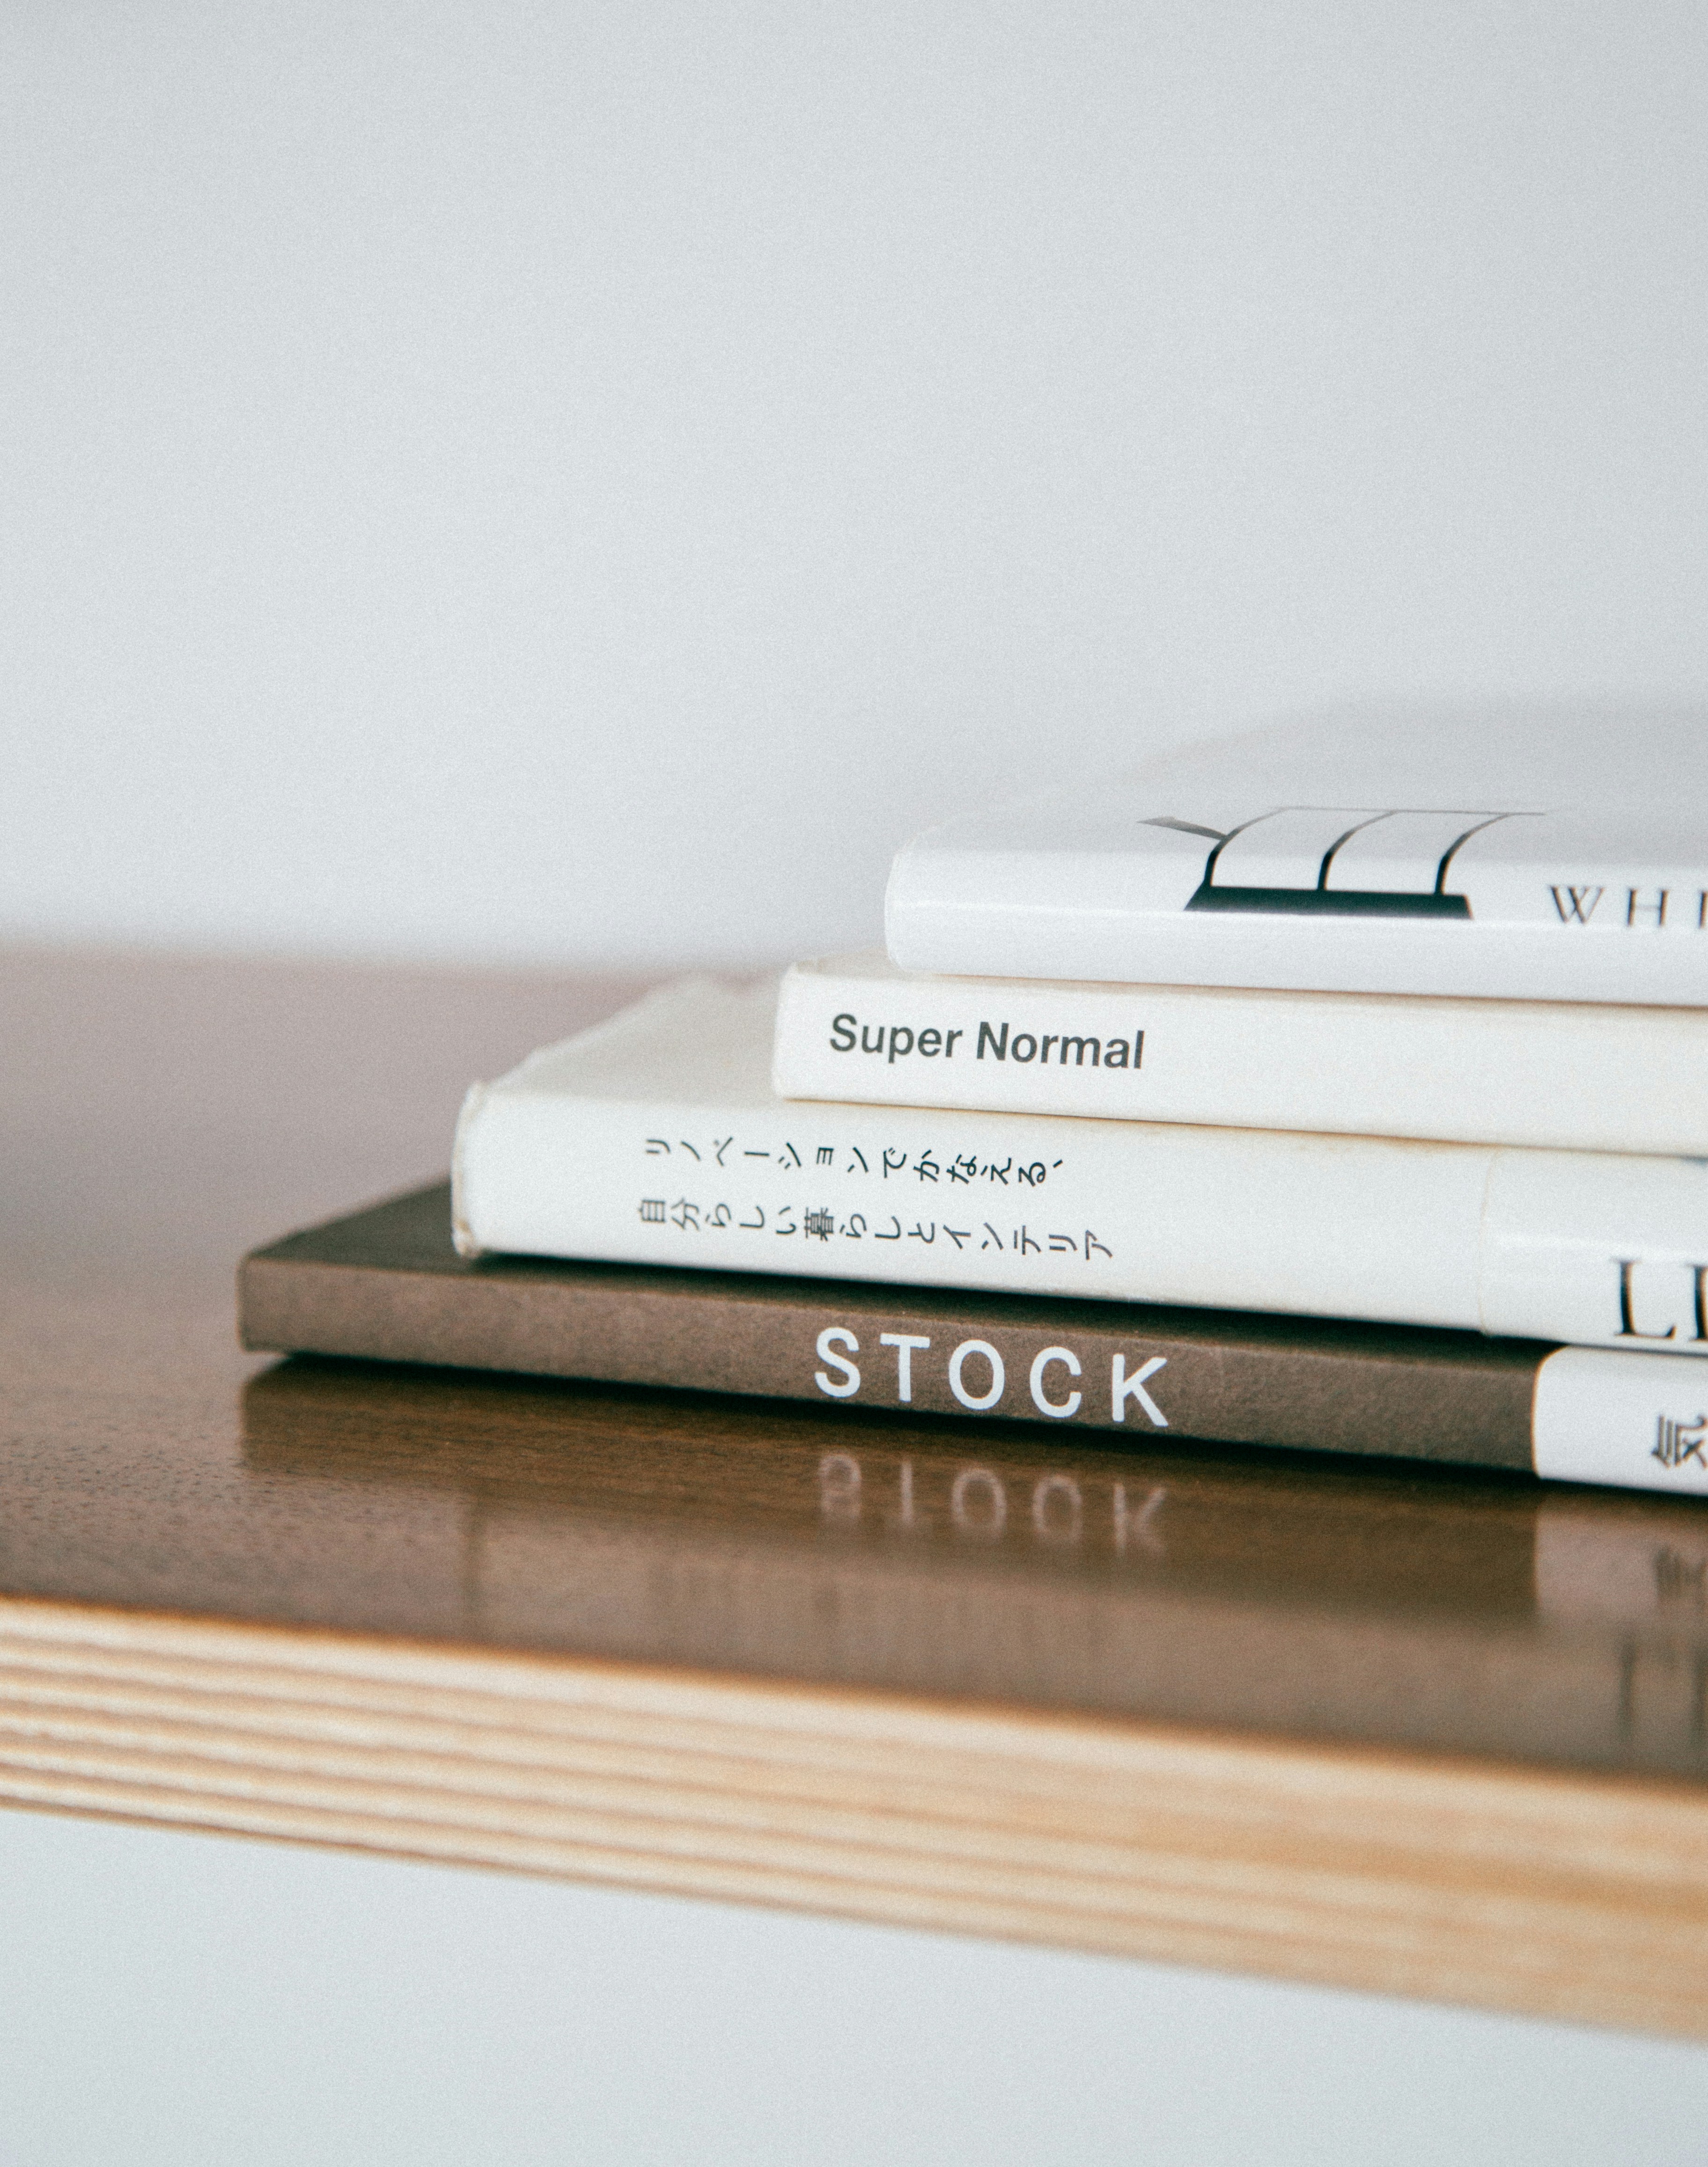 Choose from a curated selection of book photos. Always free on Unsplash.